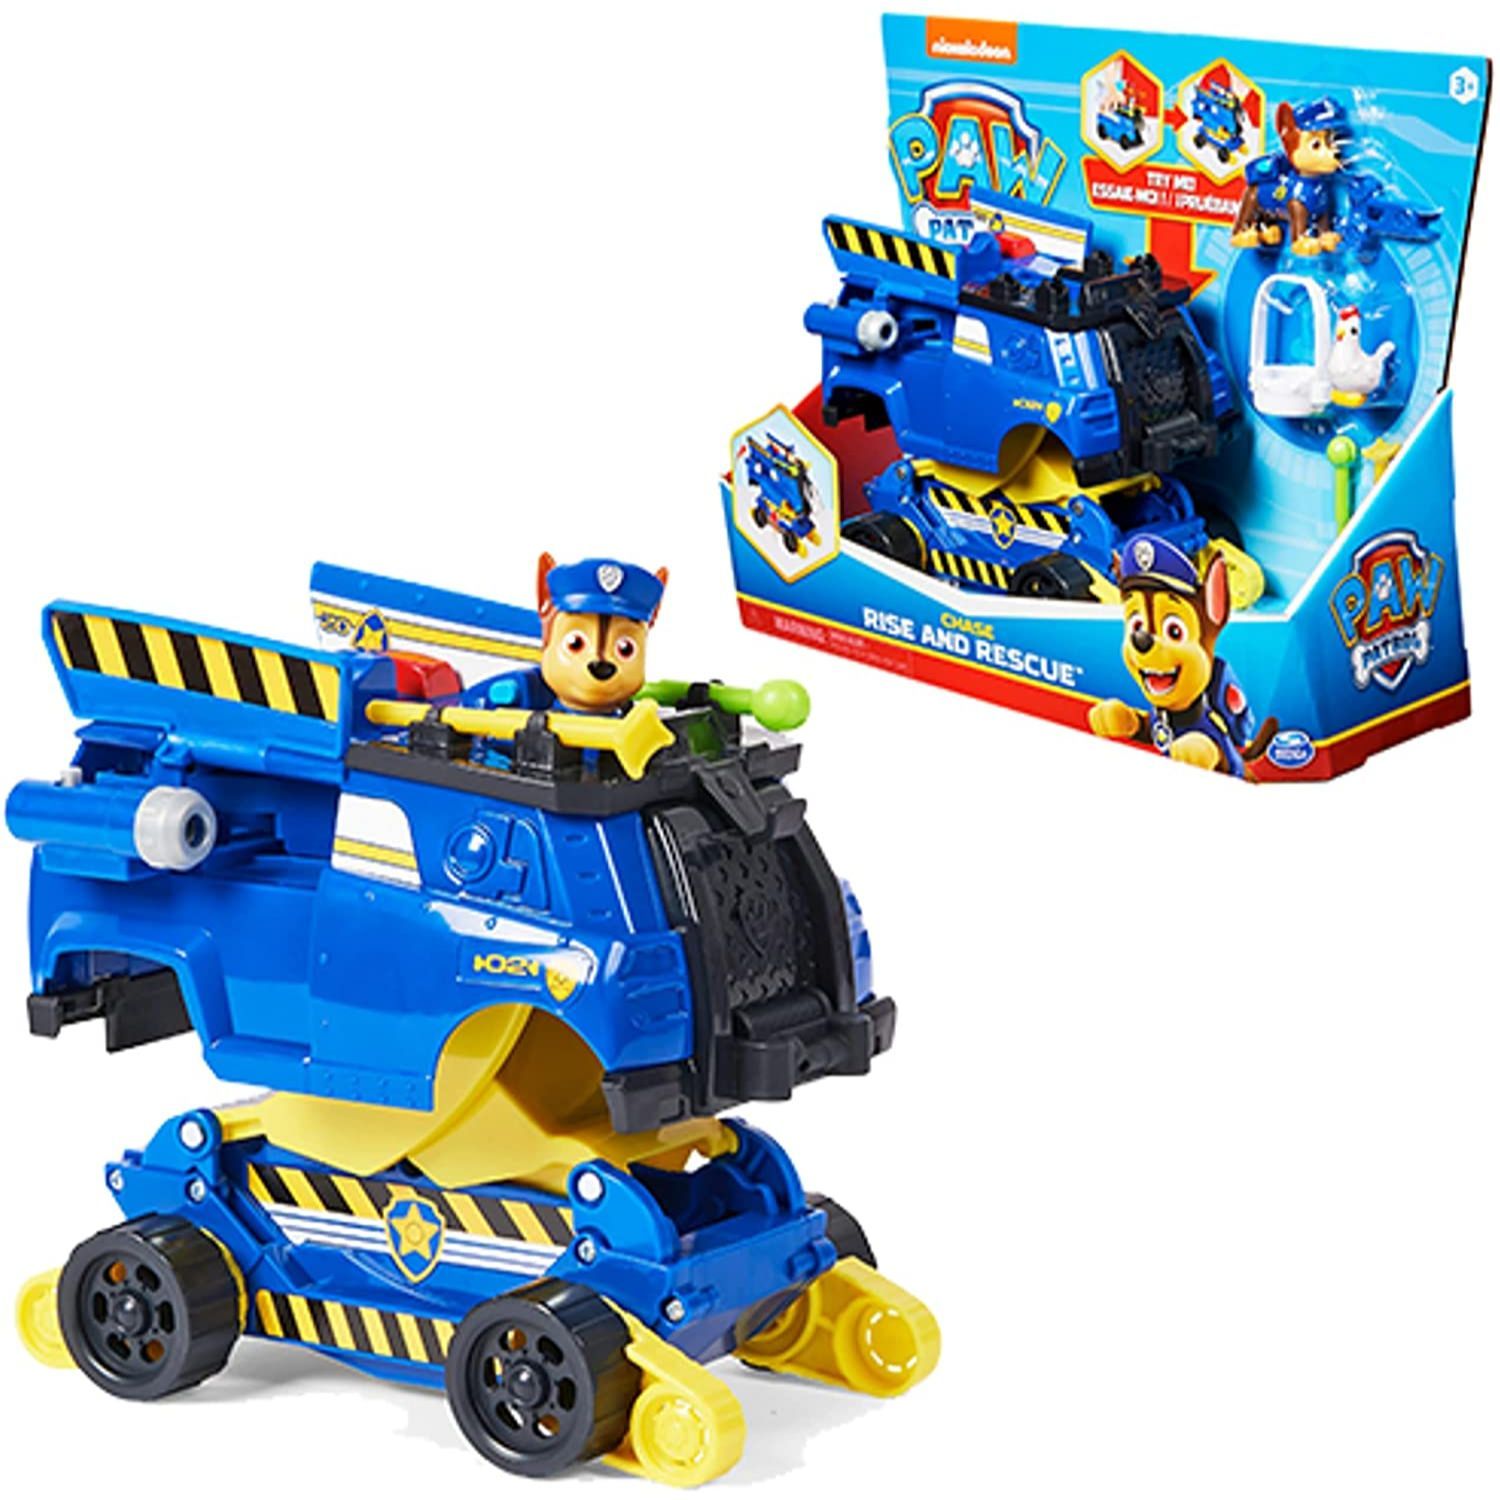 pendul virkelighed Elegance Toys & Co. - Spin Master - Paw Patrol Chase Rise & Rescue Vehicle